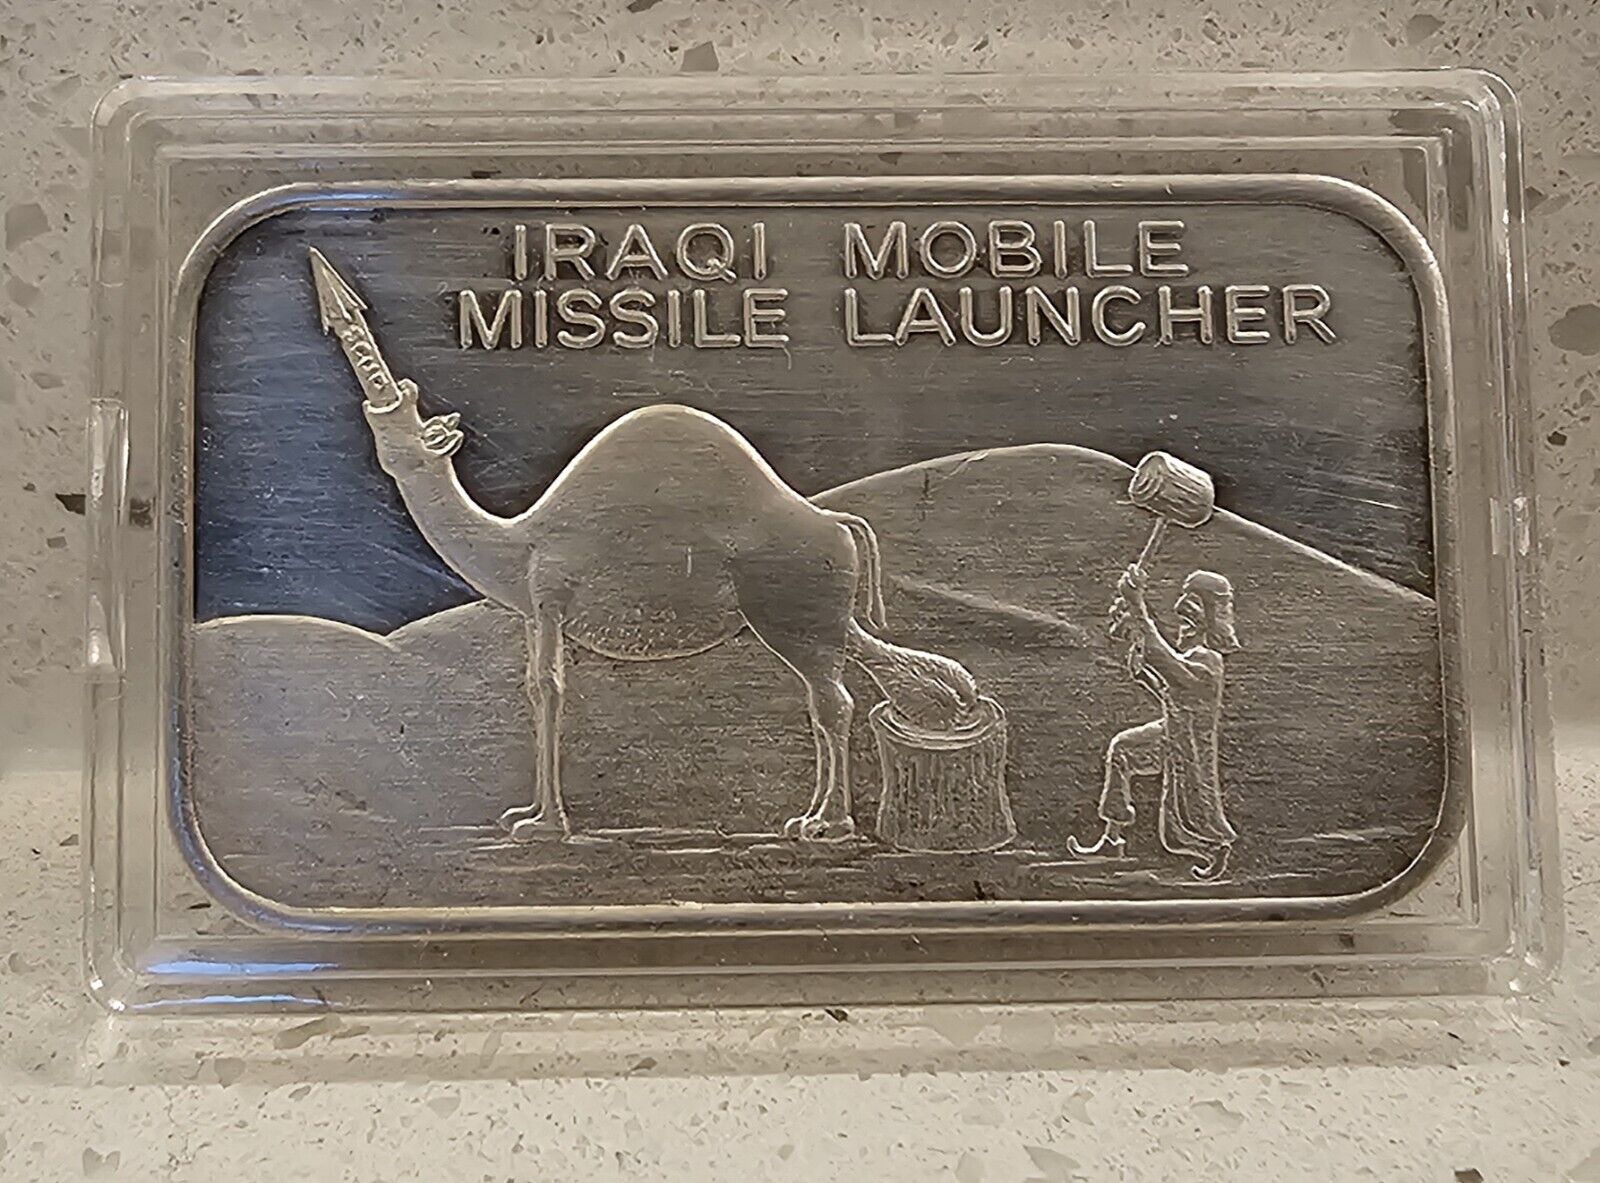 Silver Bar 1 Troy Ounce .999 Fine Desert Storm- Iraqi Mobile Missile Launcher